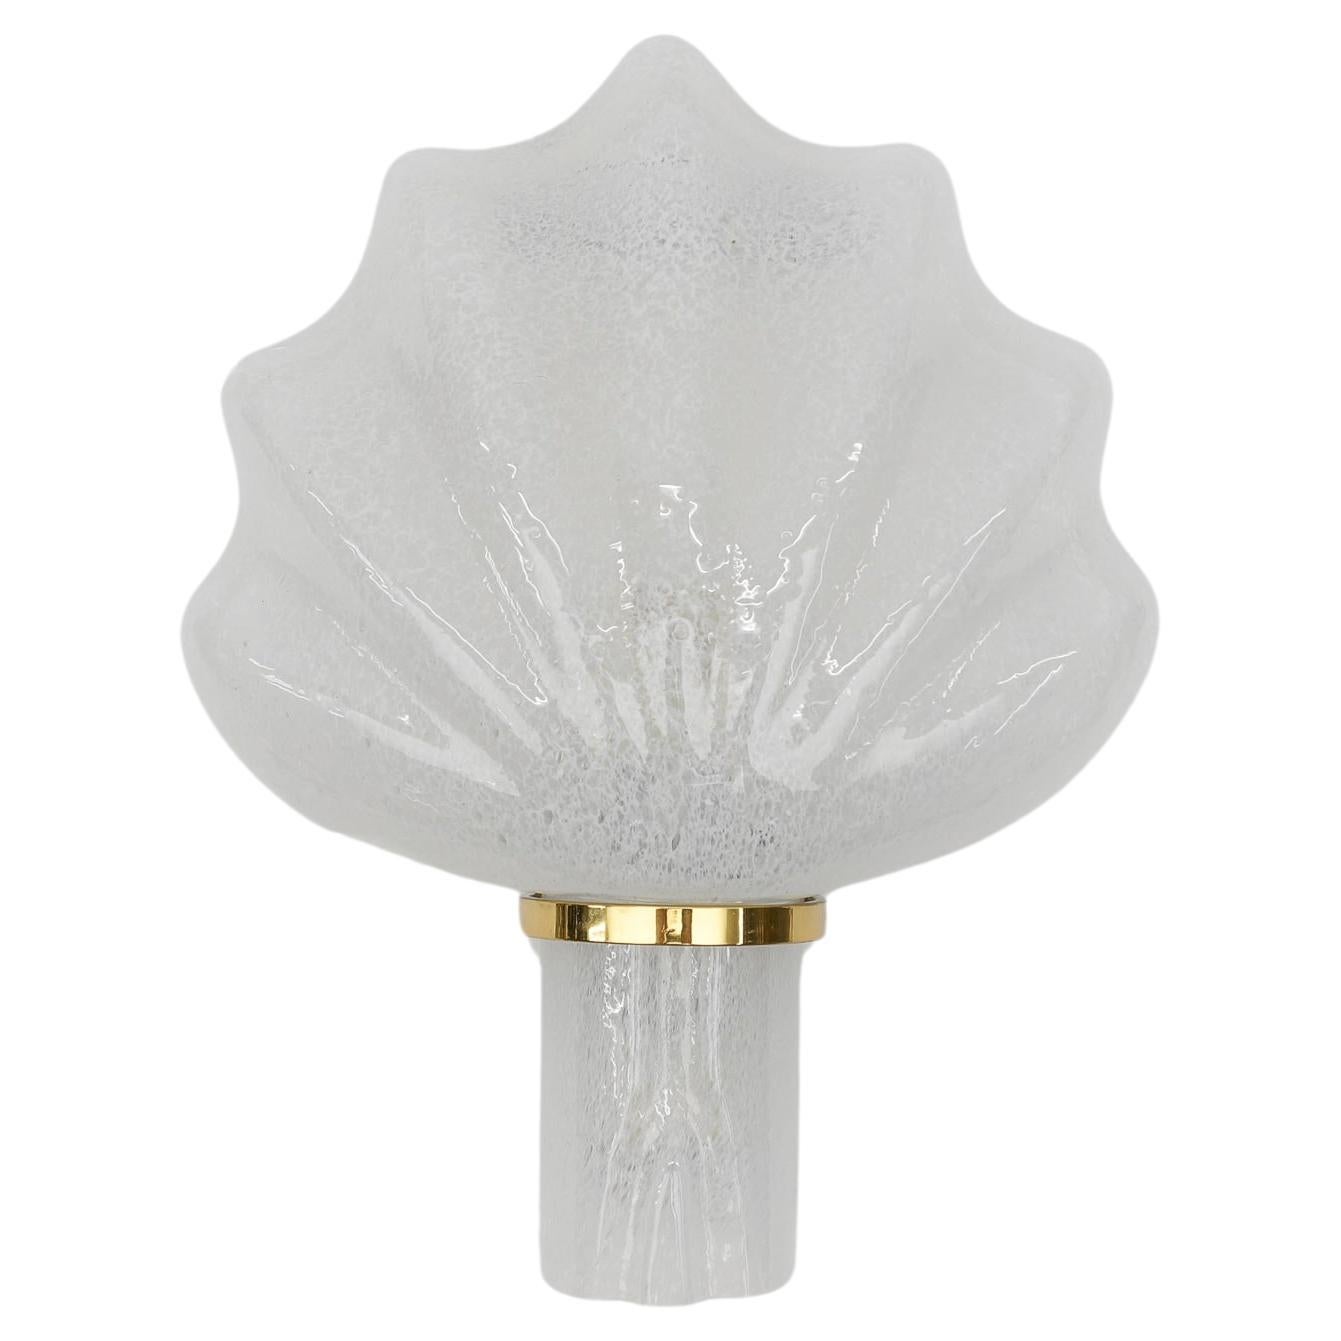 Murano Glass Shell Wall Light by Doria Leuchten, 1960s Germany   For Sale